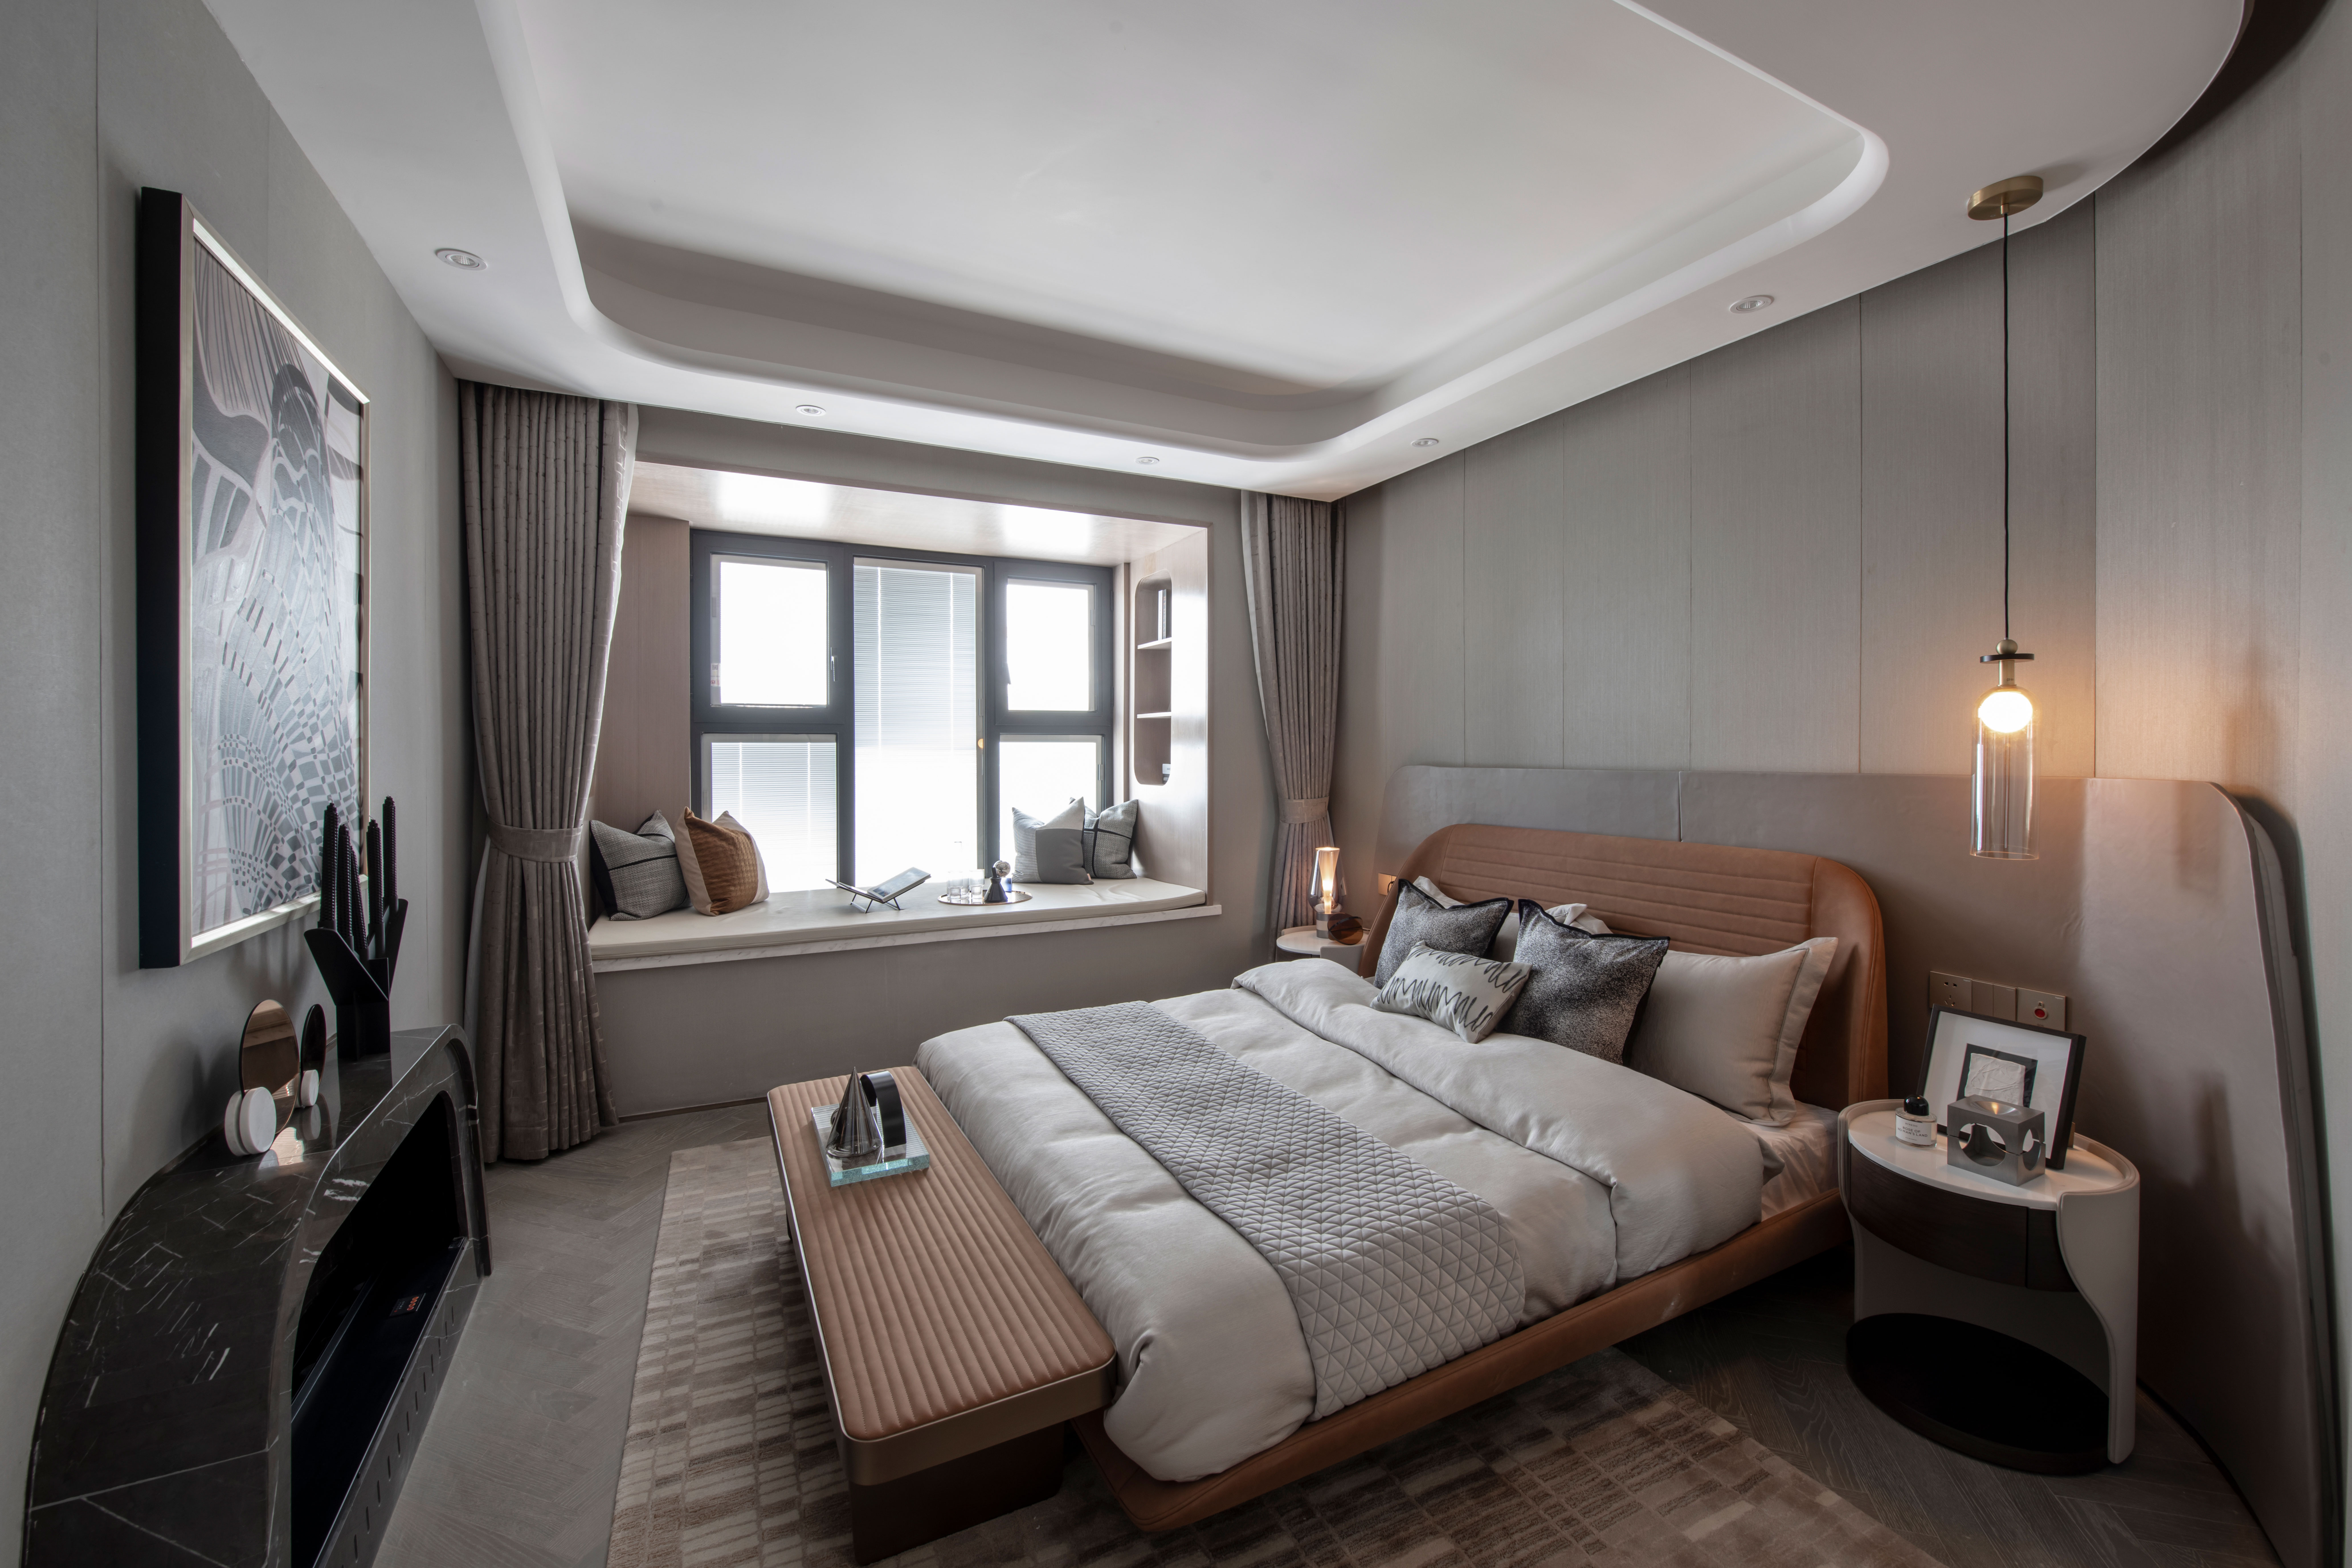 MUSE Design Winners - Suzhou Poetic Palace Apartment